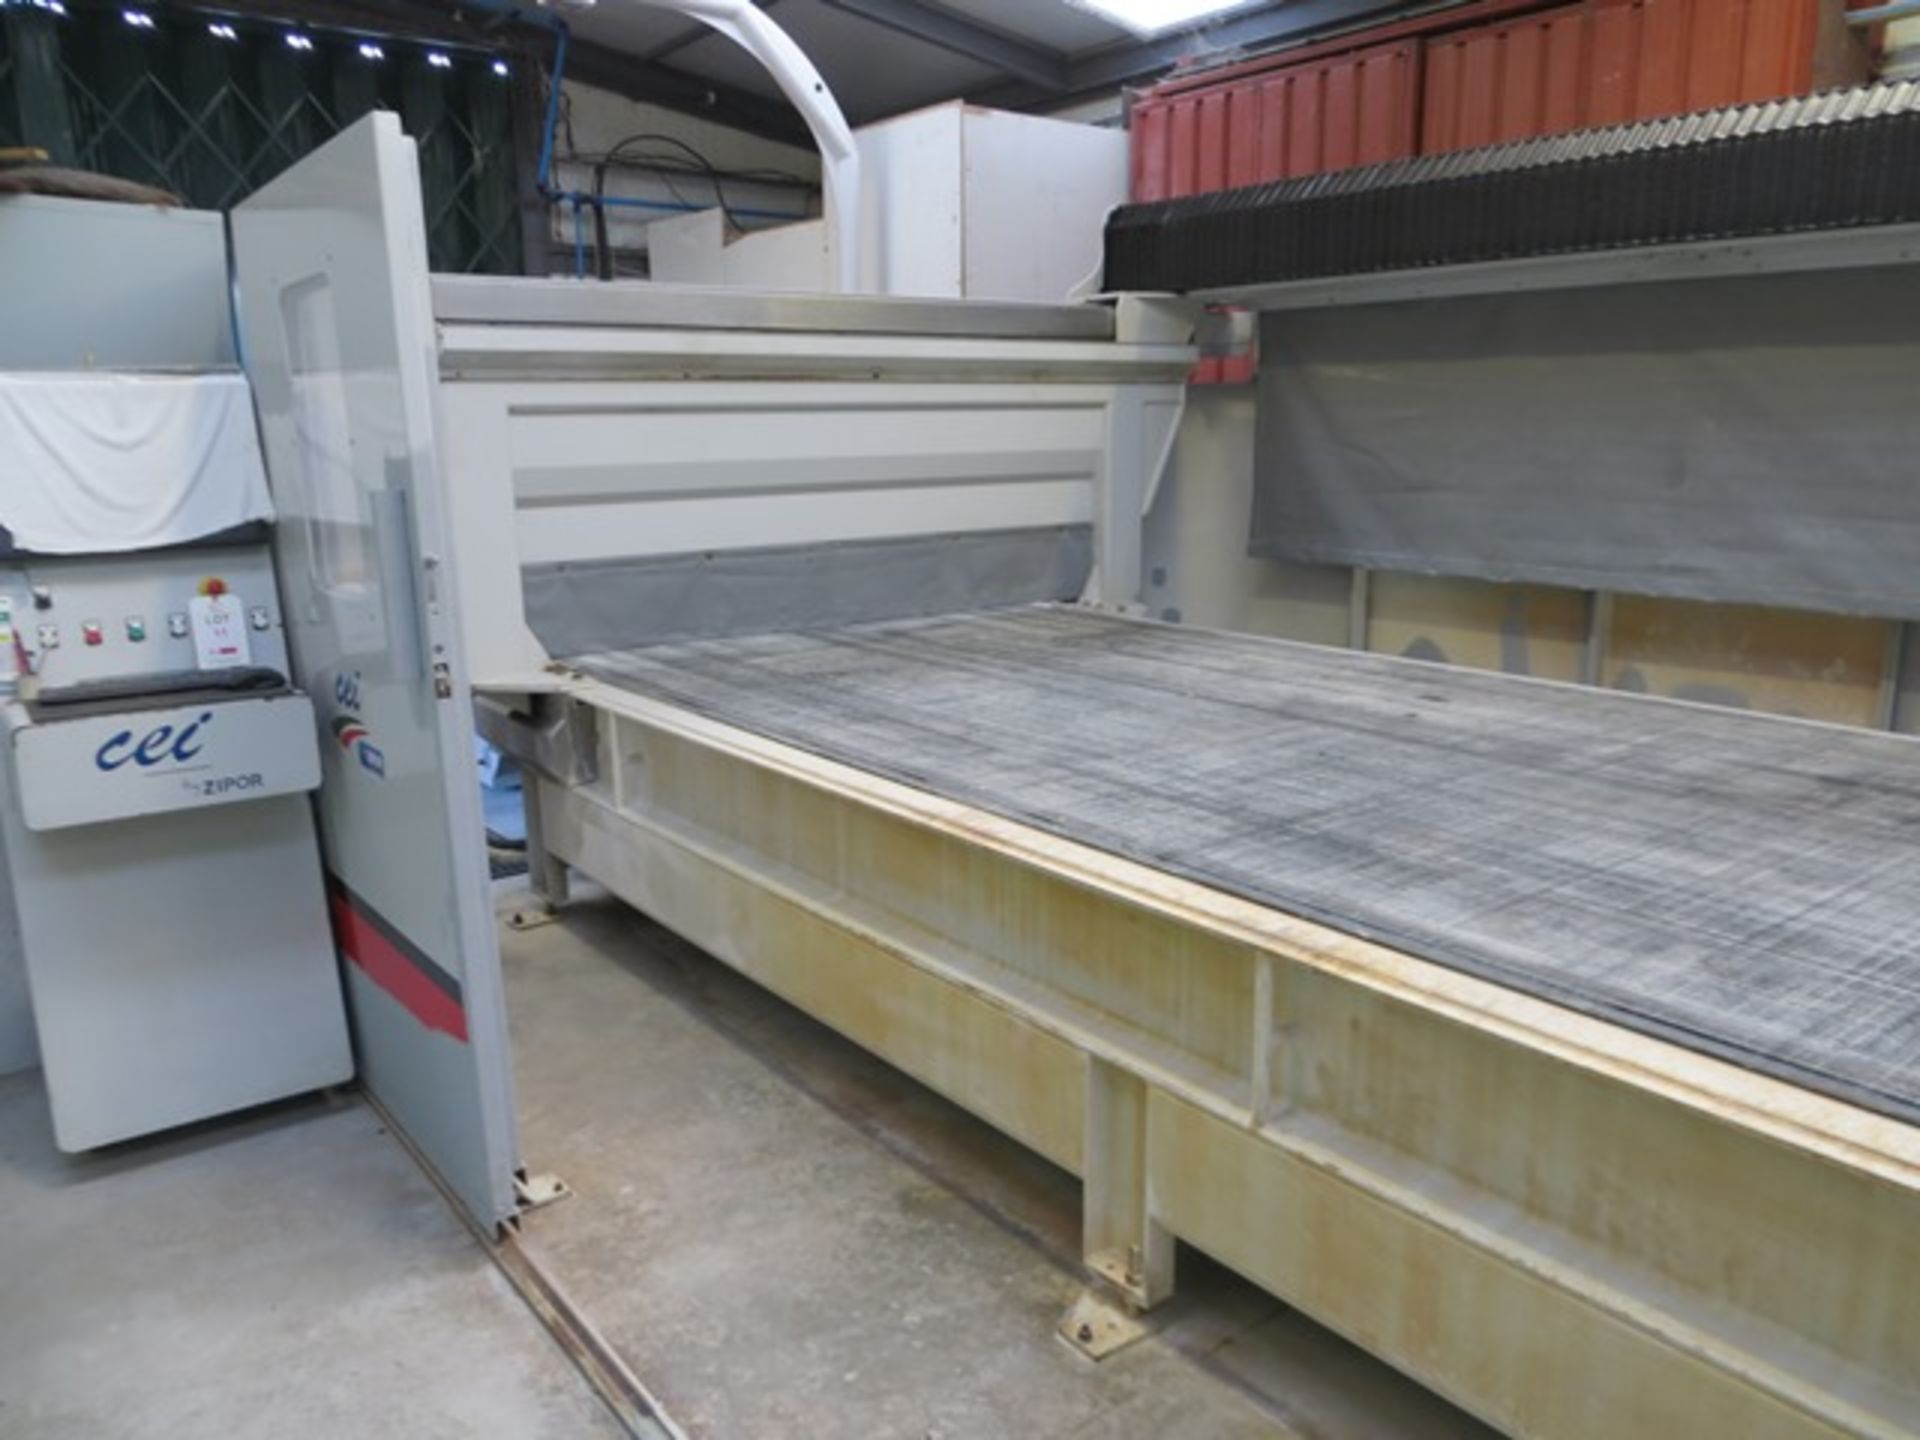 Cei by Zipor Stonecut 5x CNC cutting machine line with unload conveyor, 5 axis fully automated - Image 3 of 9